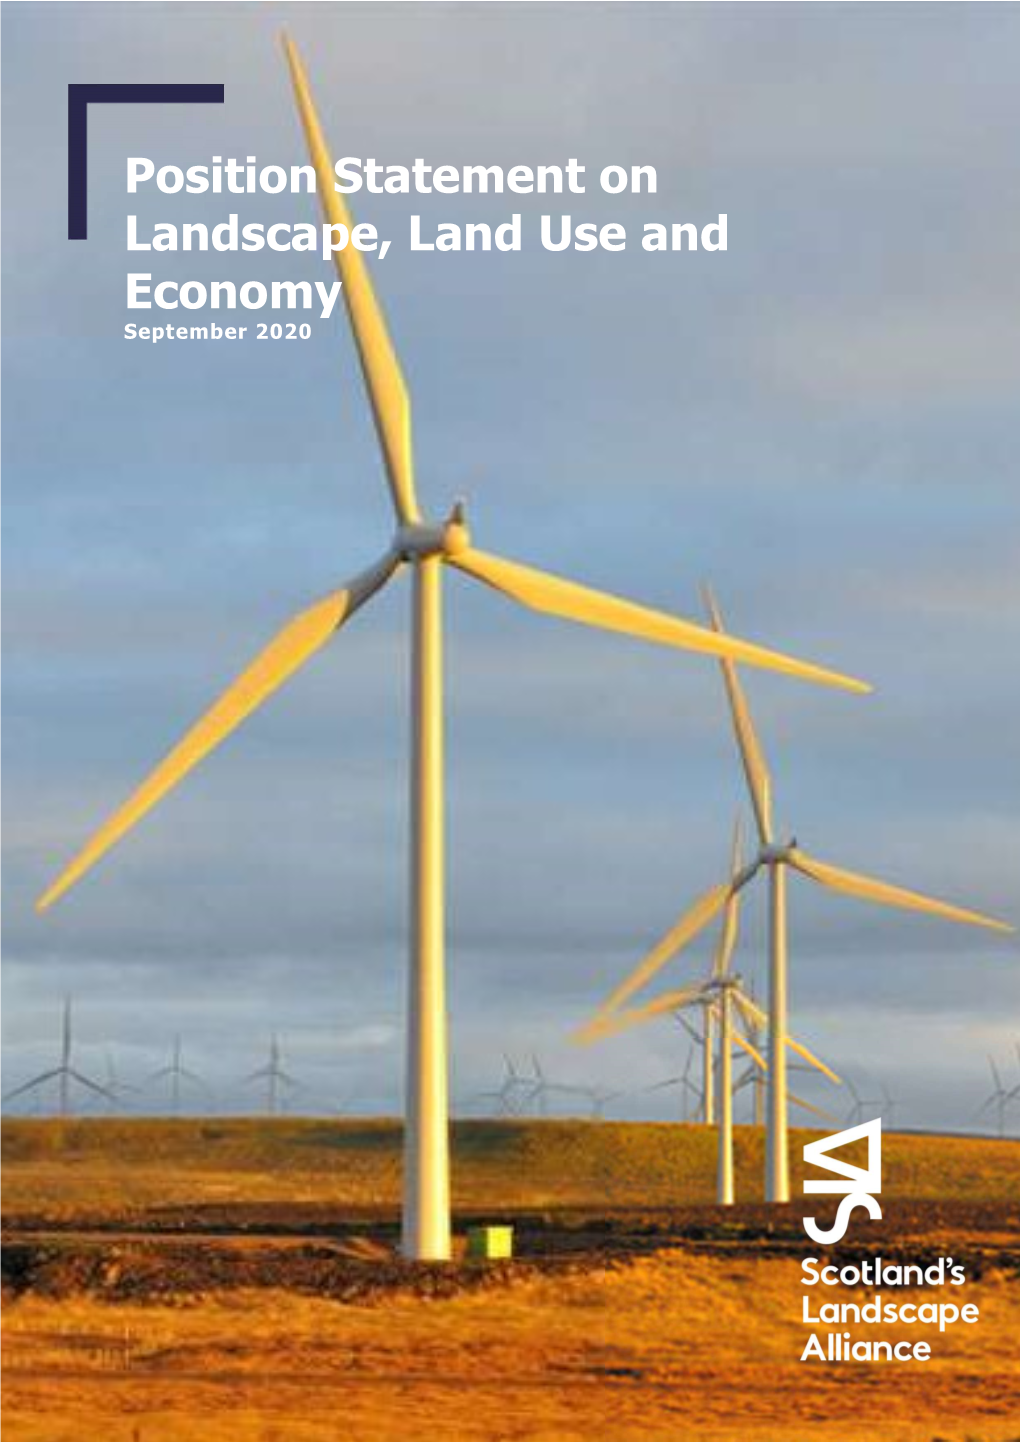 Position Statement on Landscape, Land Use and Economy